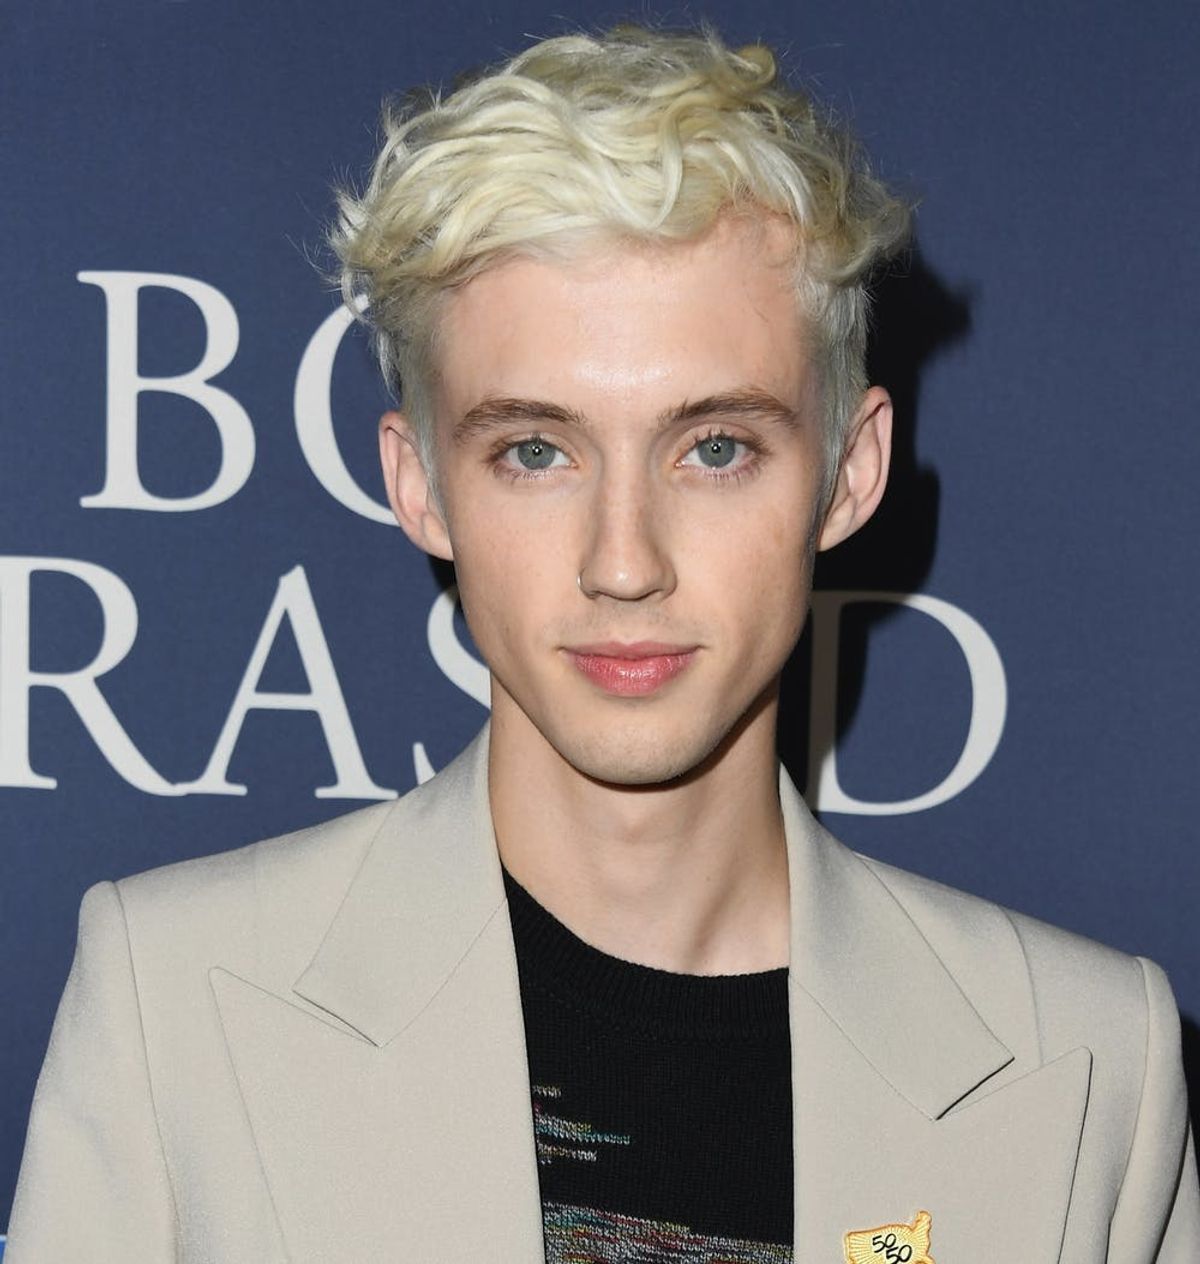 Pop Star and Actor Troye Sivan Is on a Mission to Help End Conversion Therapy